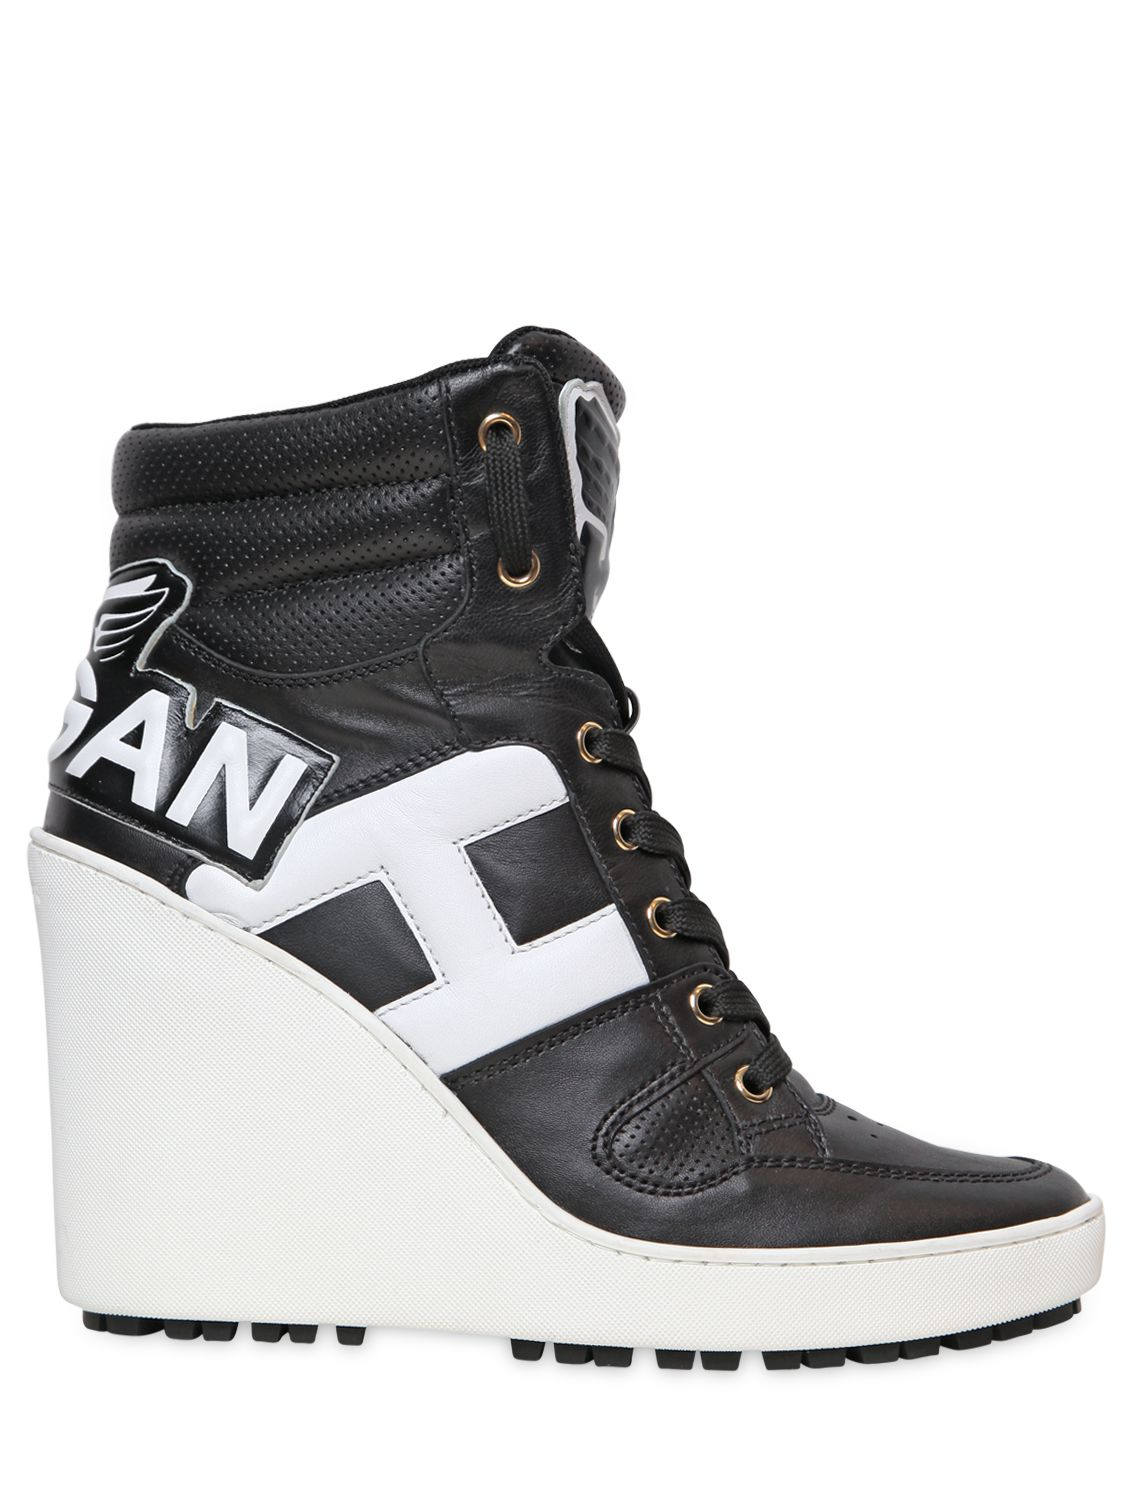 Hogan 100mm Lace-up Wedge Sneakers in Black/White (Black) - Lyst